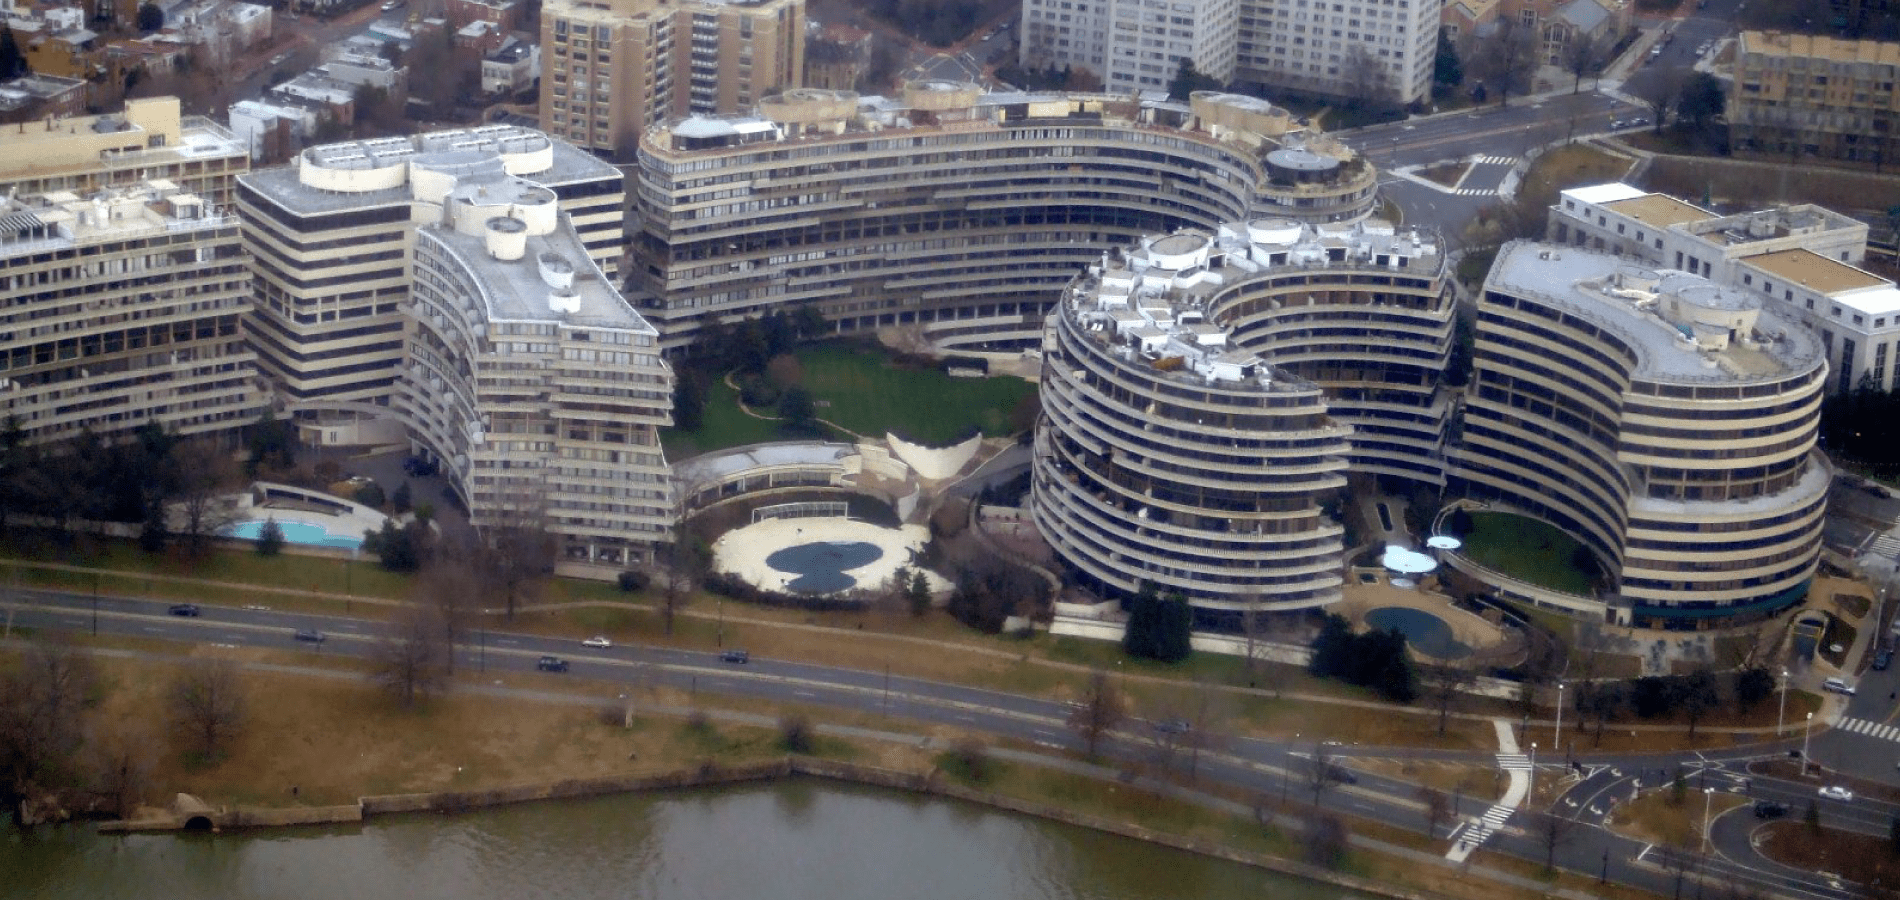 Watergate Complex from the air